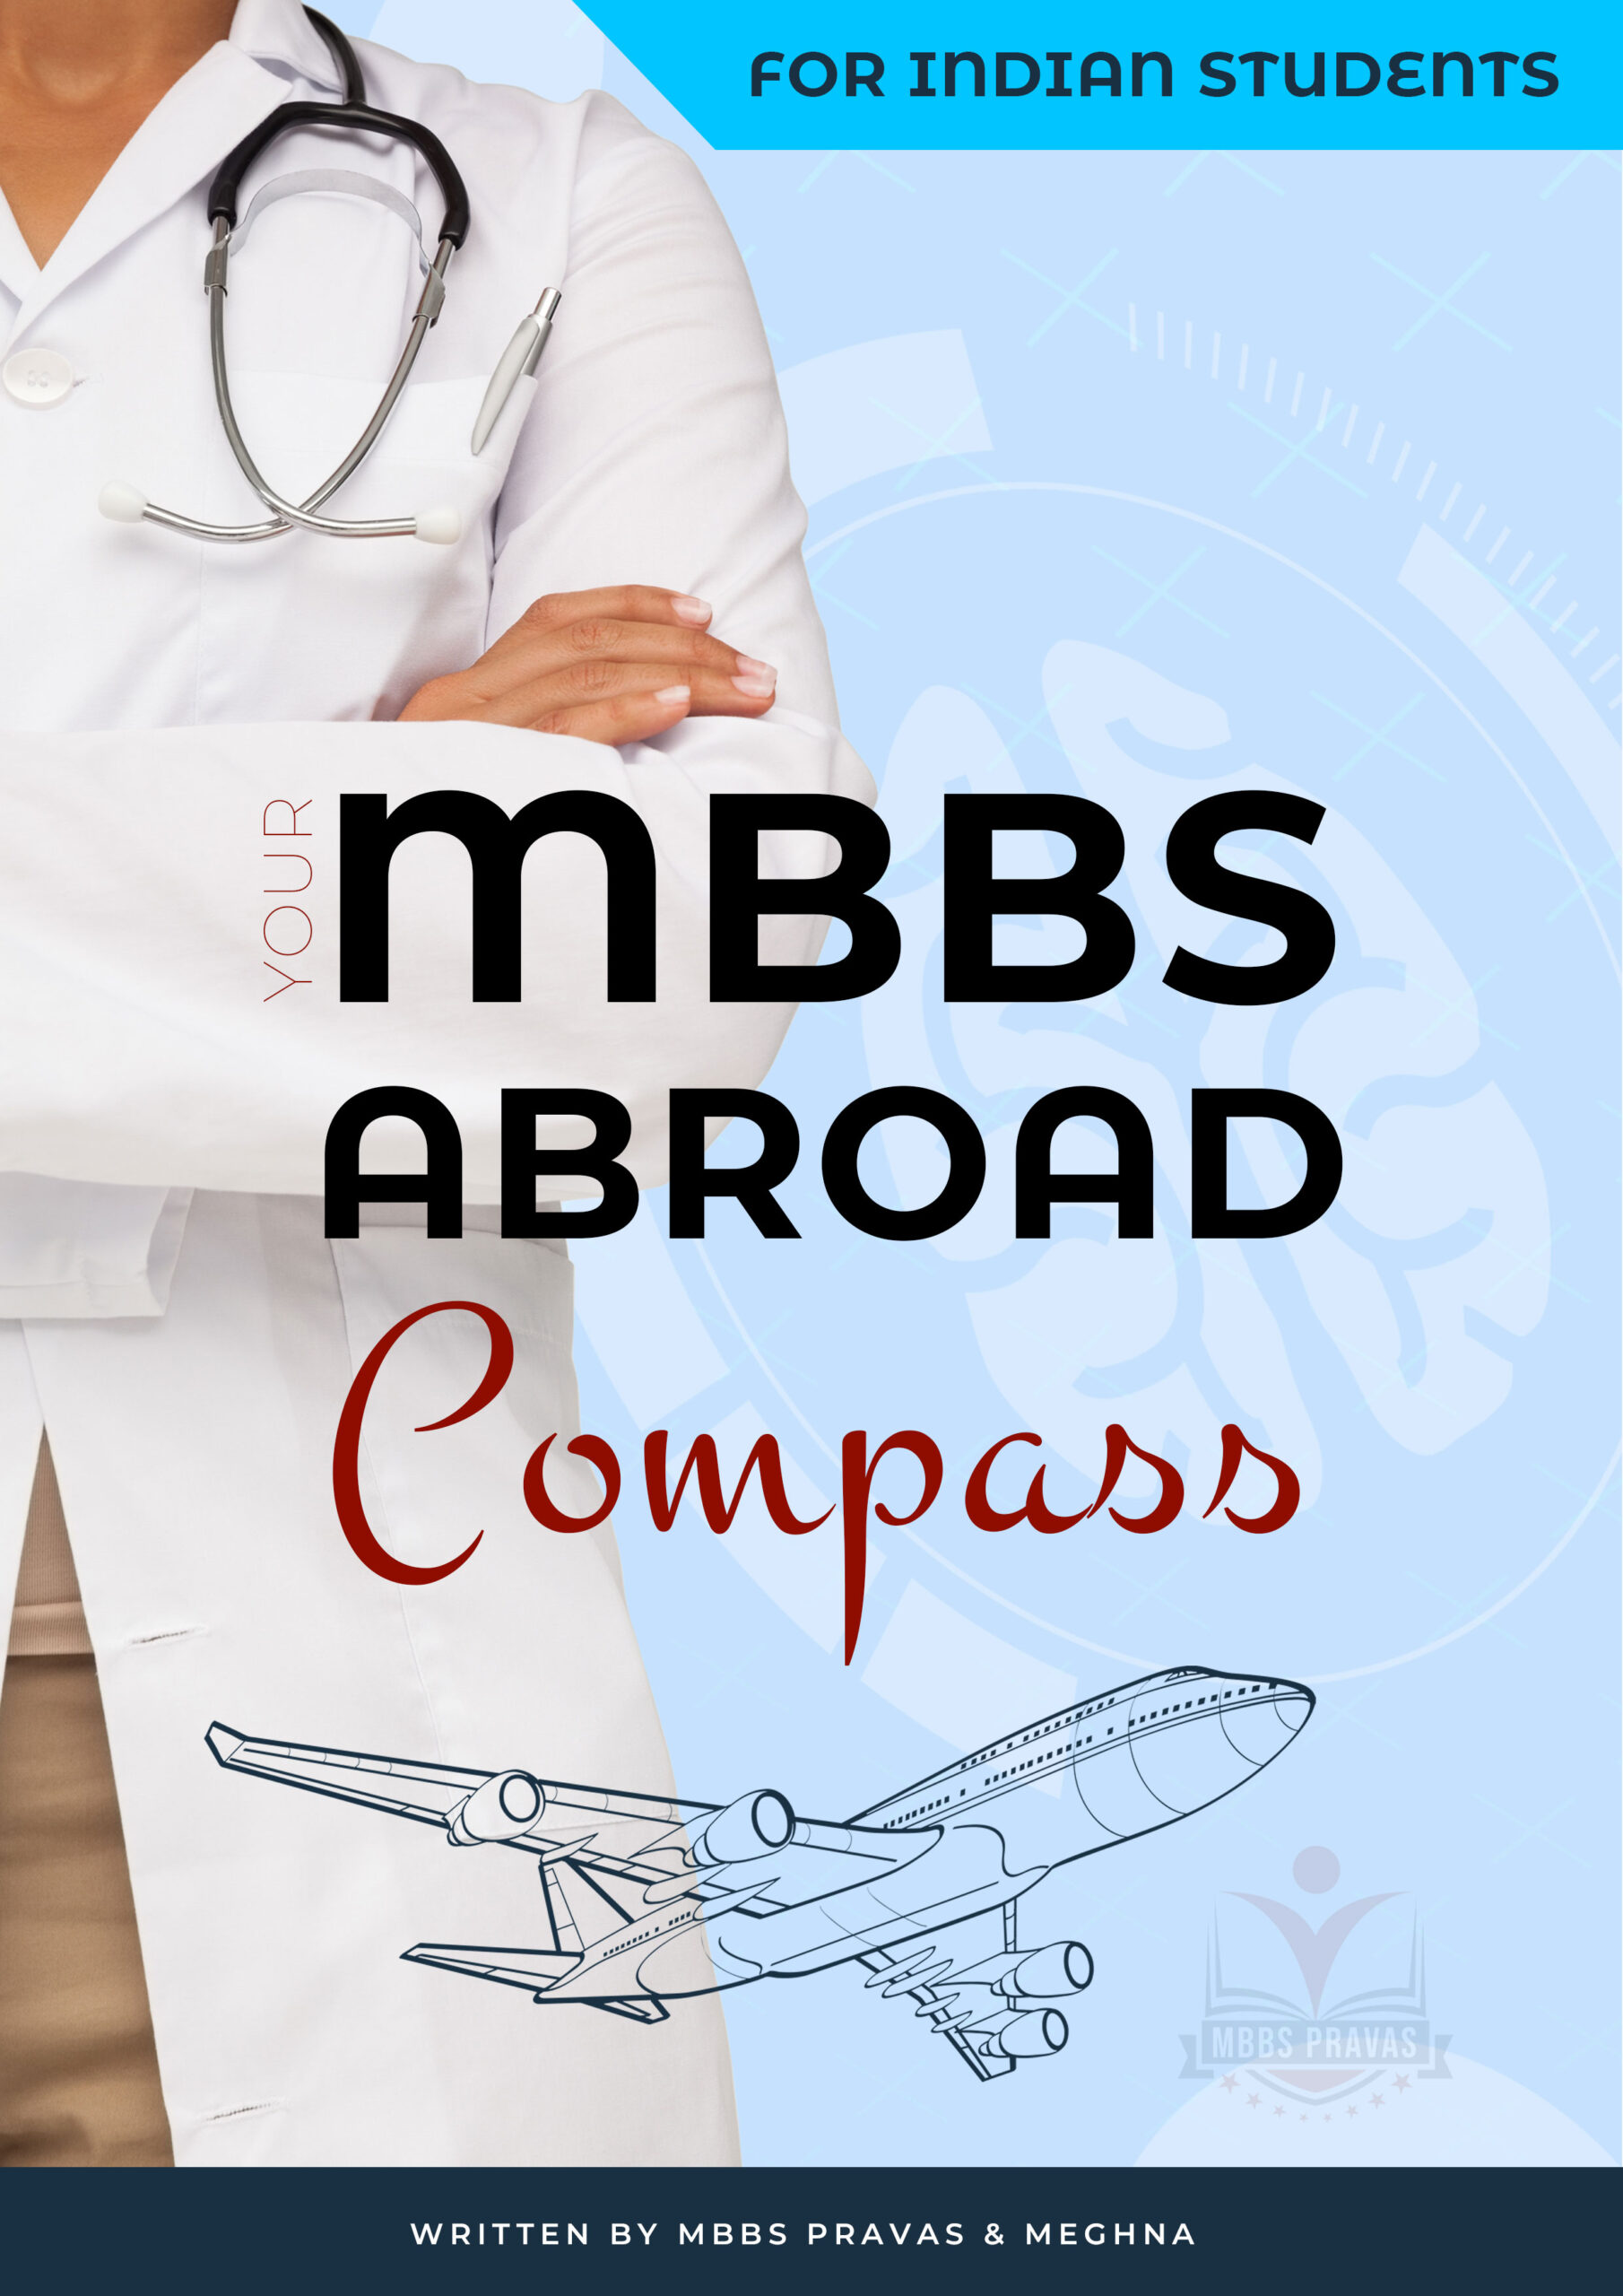 Your MBBS Abroad Compass - E-Book by MBBS Pravas